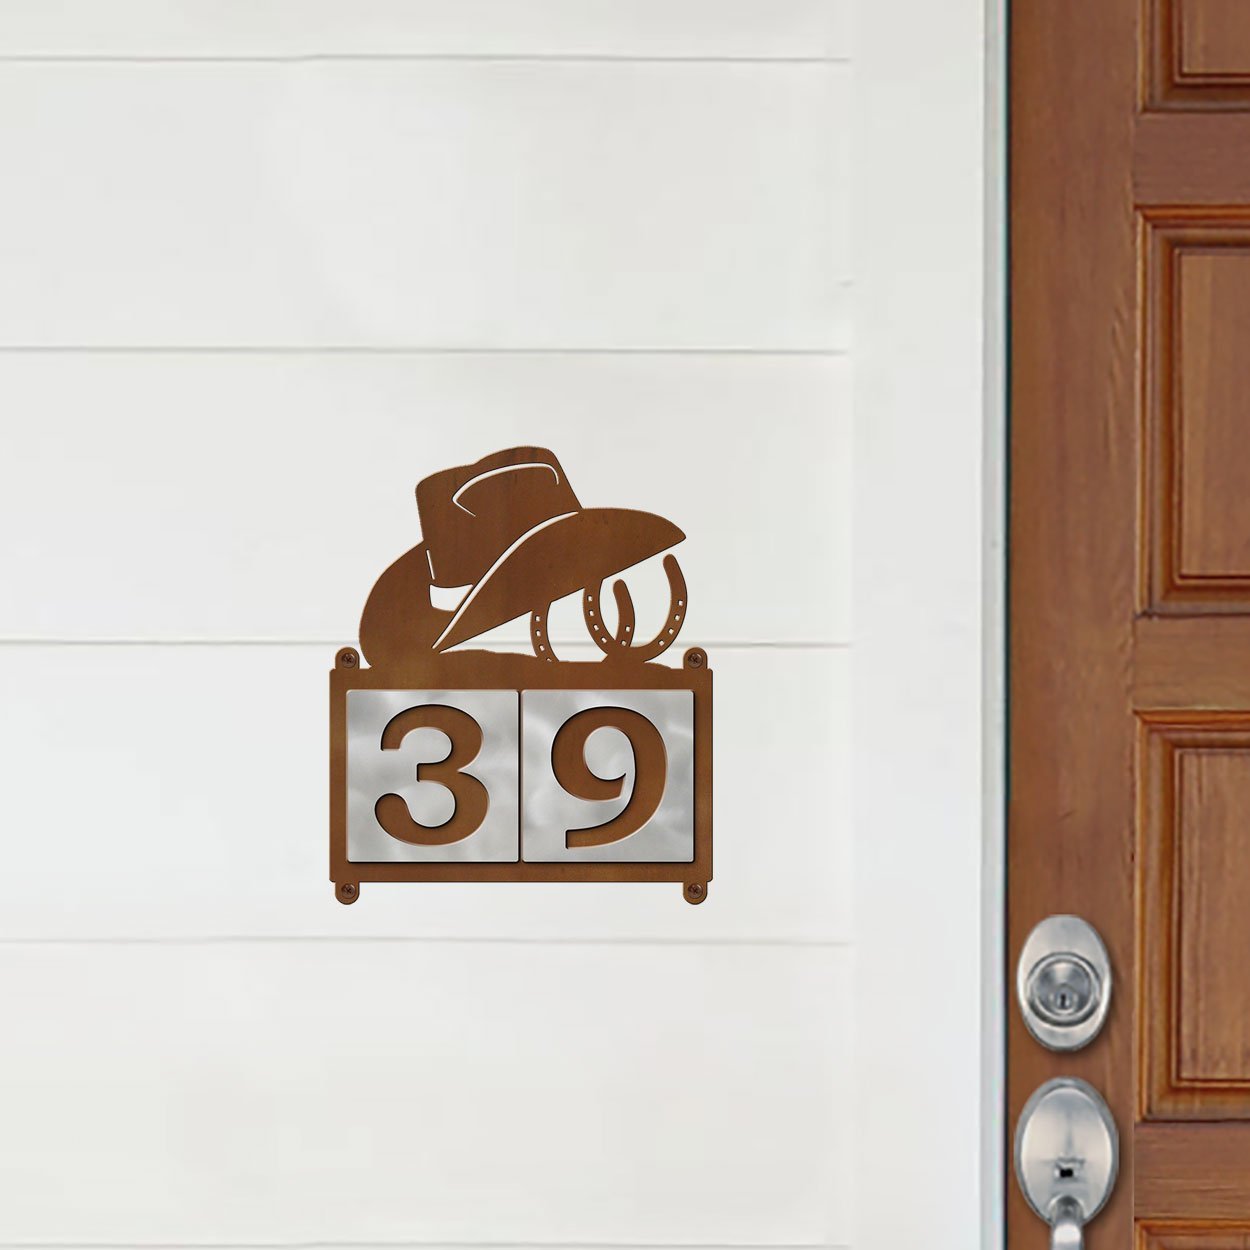 607042 - Cowboy Hat and Horseshoes Design 2-Digit Horizontal 4-inch Tile Outdoor House Numbers